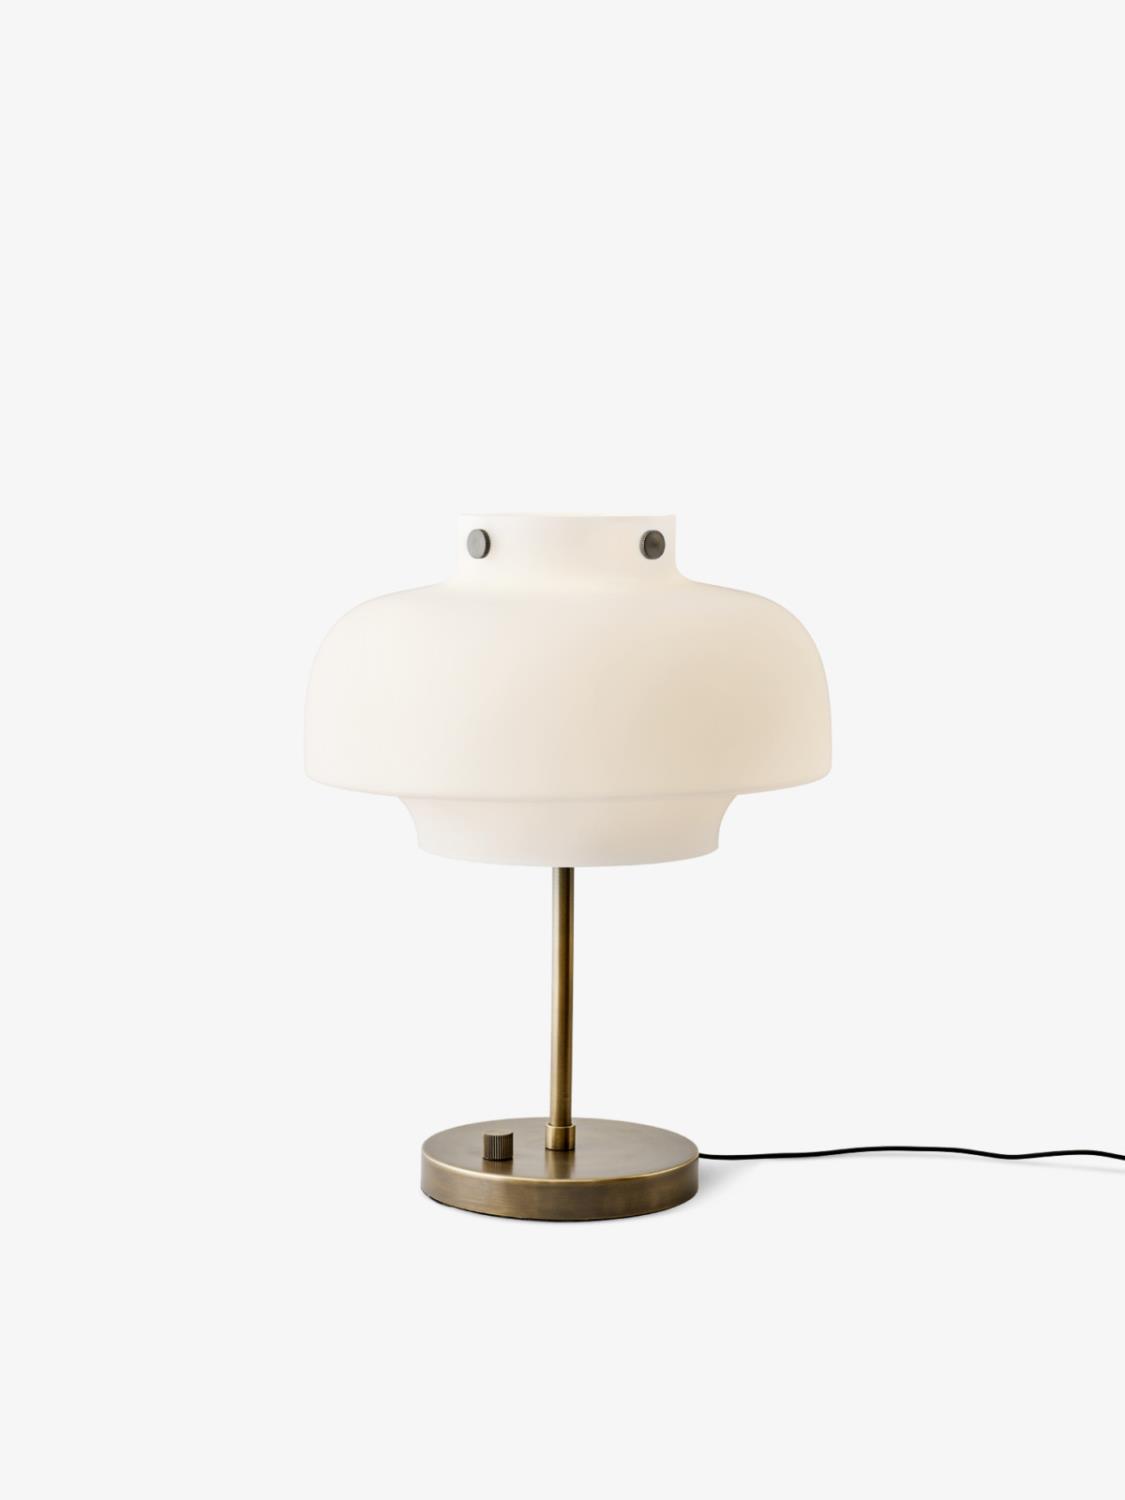 &Tradition - Copenhagen Table Lamp SC13 - Opal Glass and Bronzed Brass